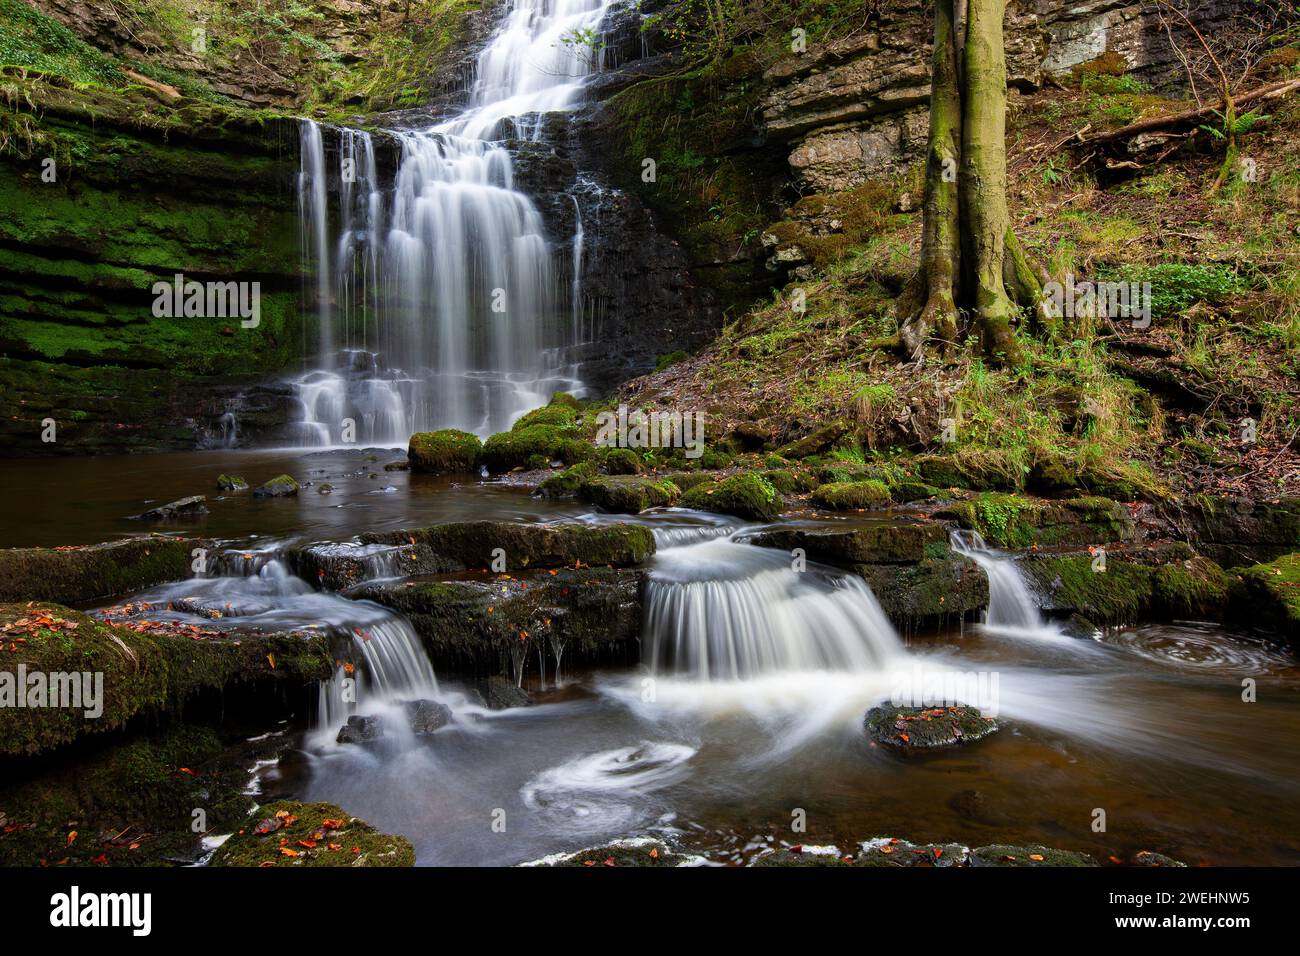 Scaleber Force. a waterfall in the North Yorkshire Dales close to Settle. Yorkshire Dales National Park, Yorkshire, England, United Kingdom Stock Photo